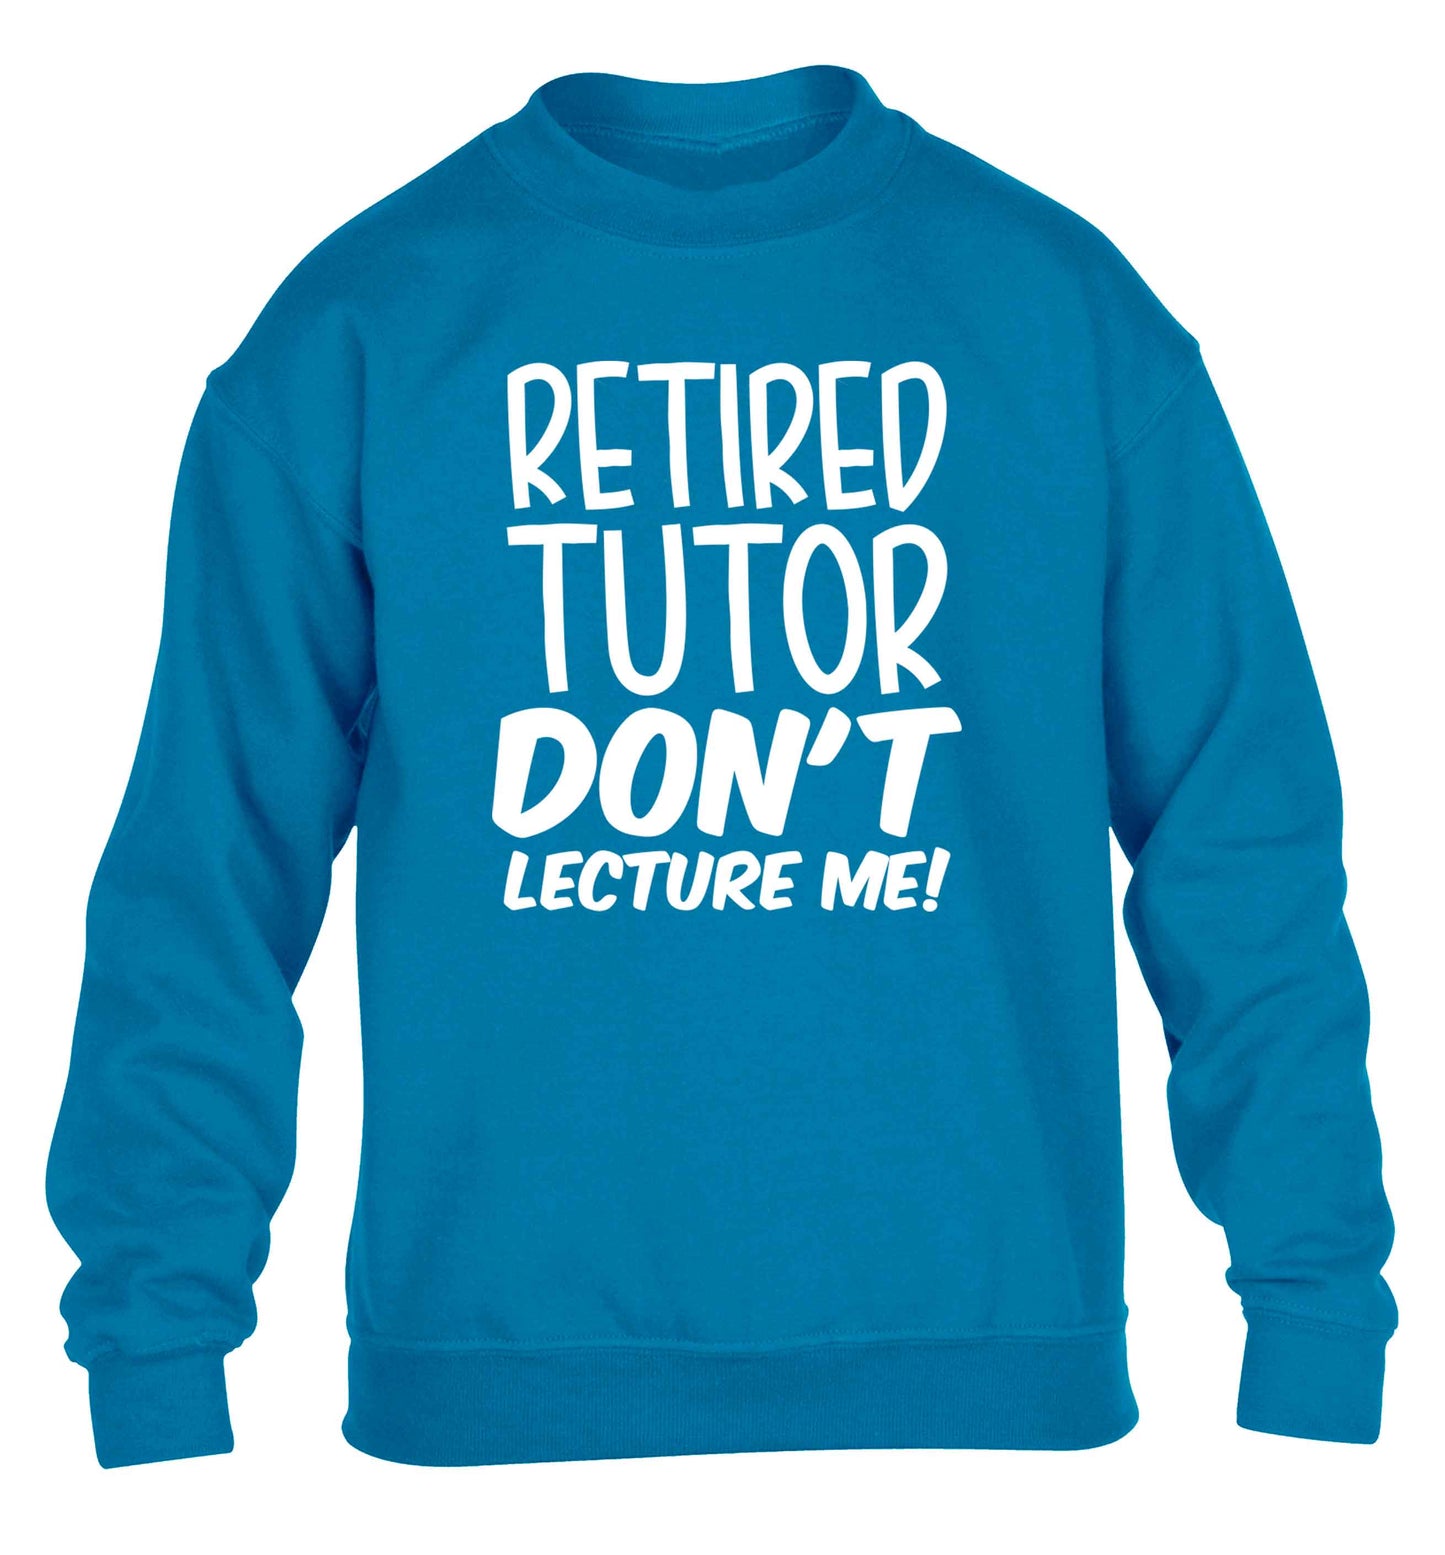 Retired tutor don't lecture me! children's blue sweater 12-13 Years